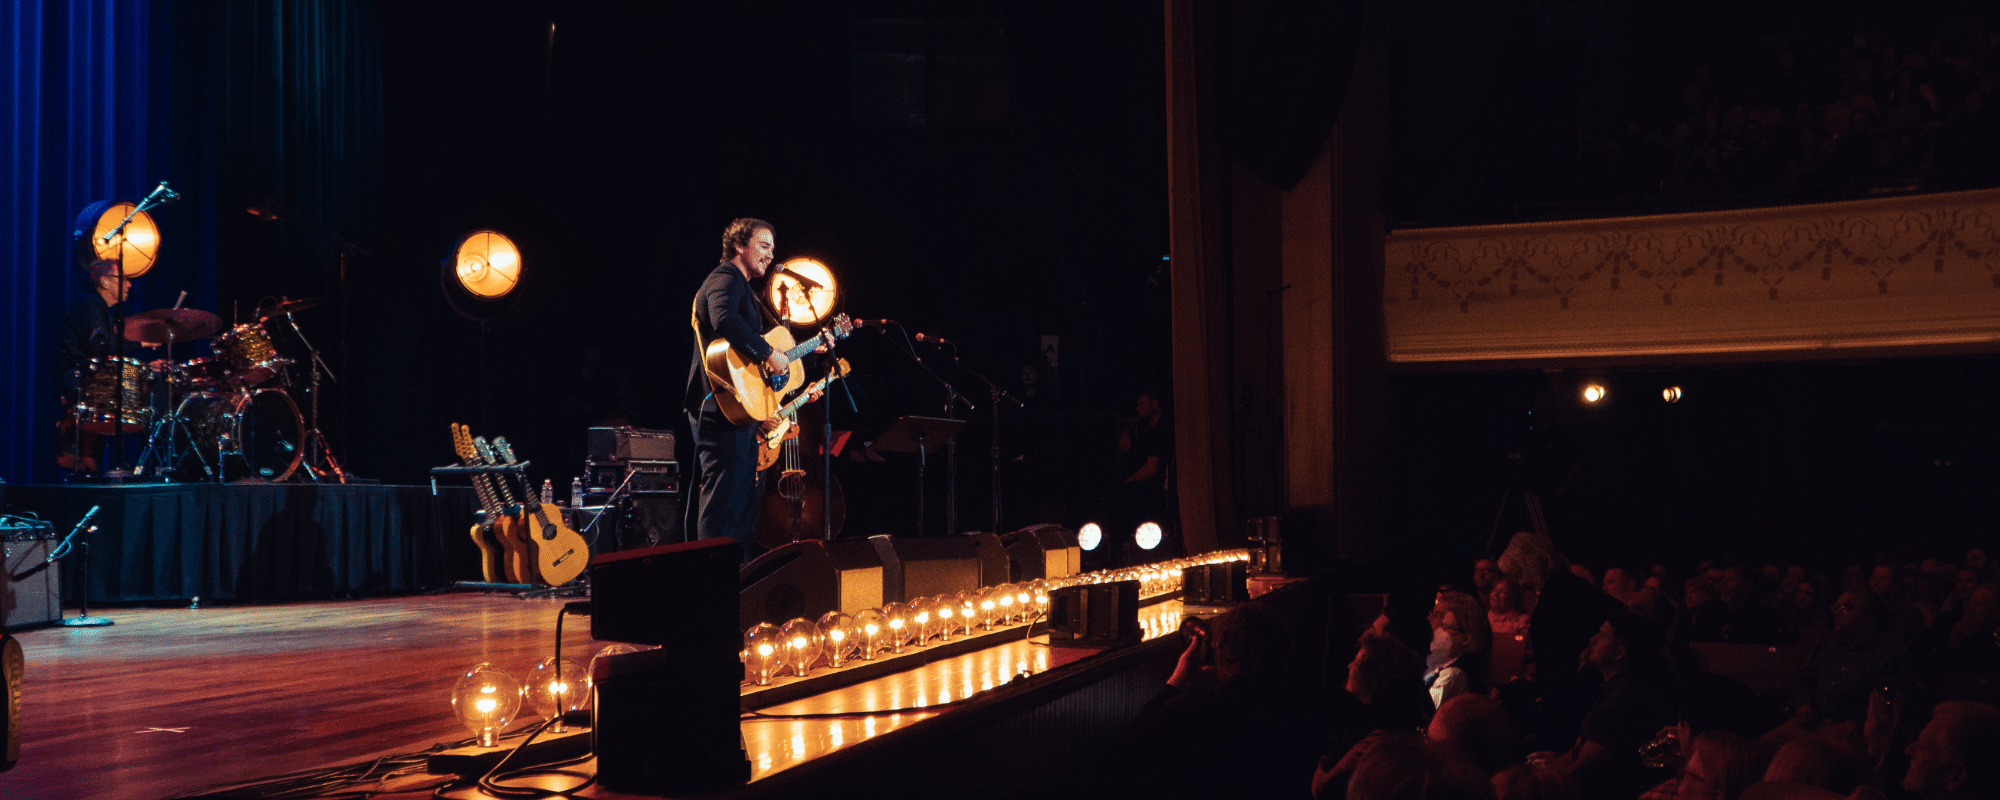 John Prine’s Enduring Legacy Showcased at the Ryman for “You Got Gold” Concert Series